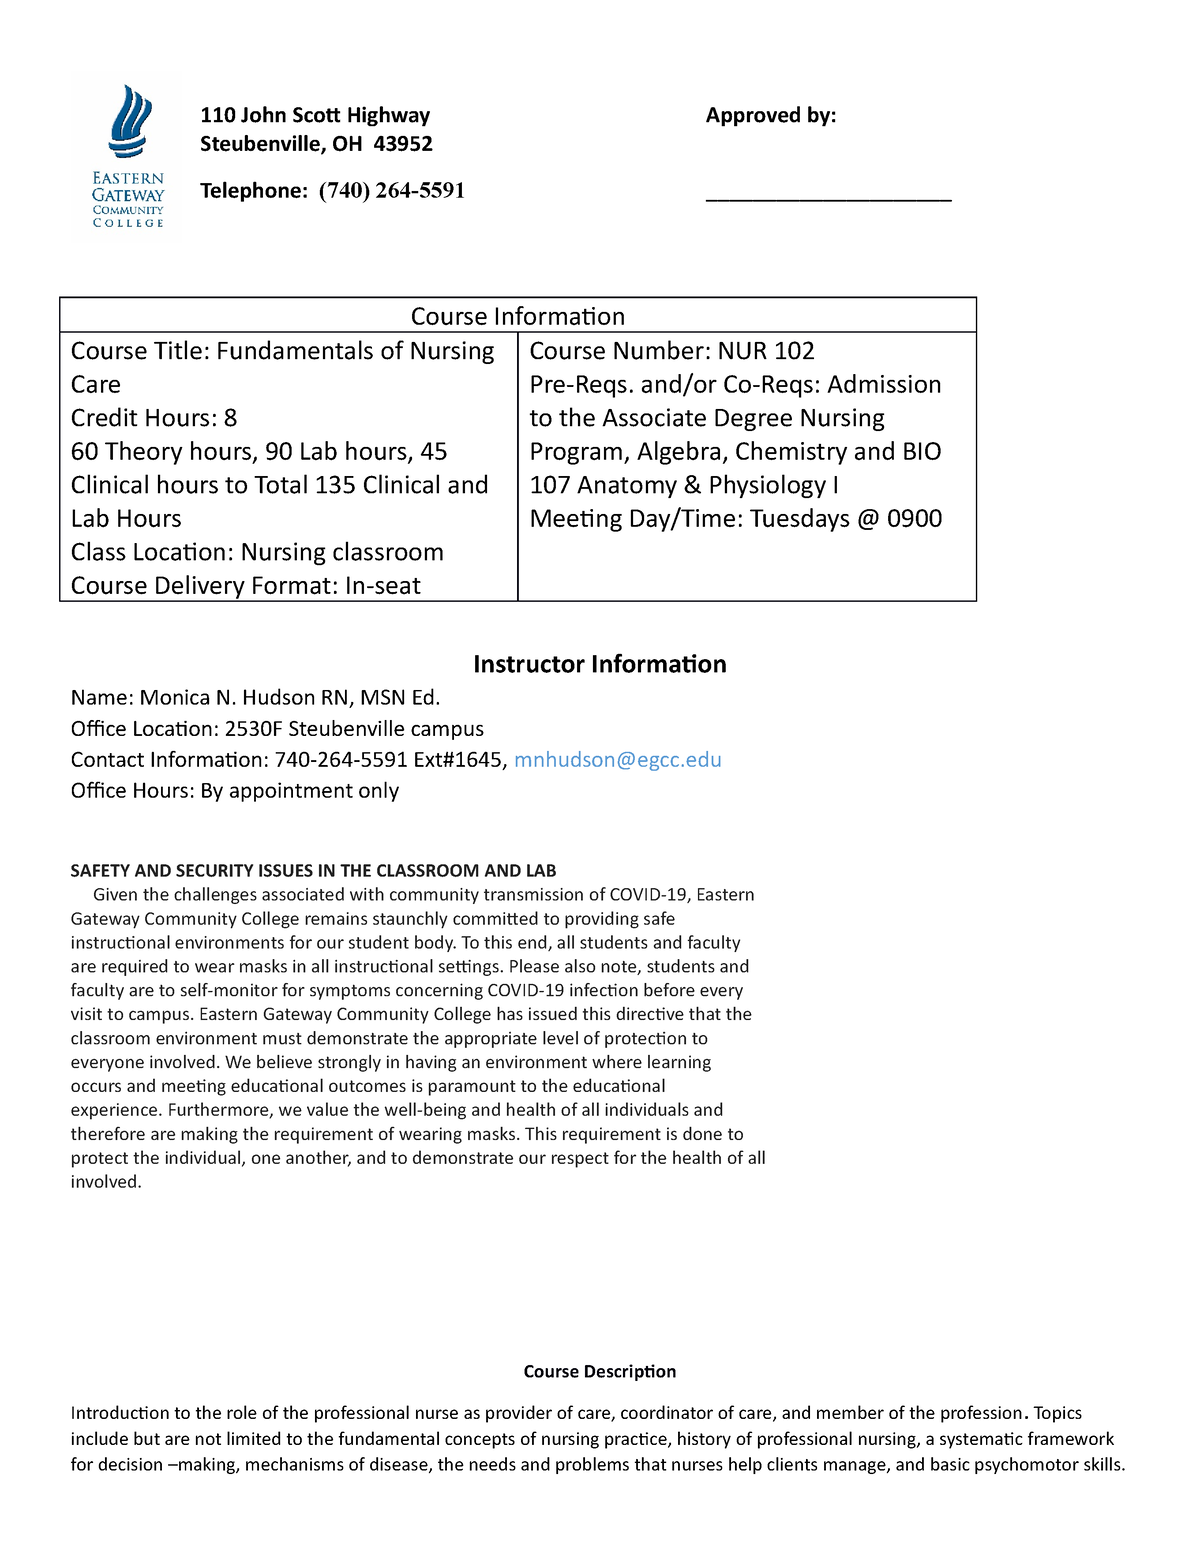 NUR 102 Master Syllabus Template Fall 2020 with Covid statement updated